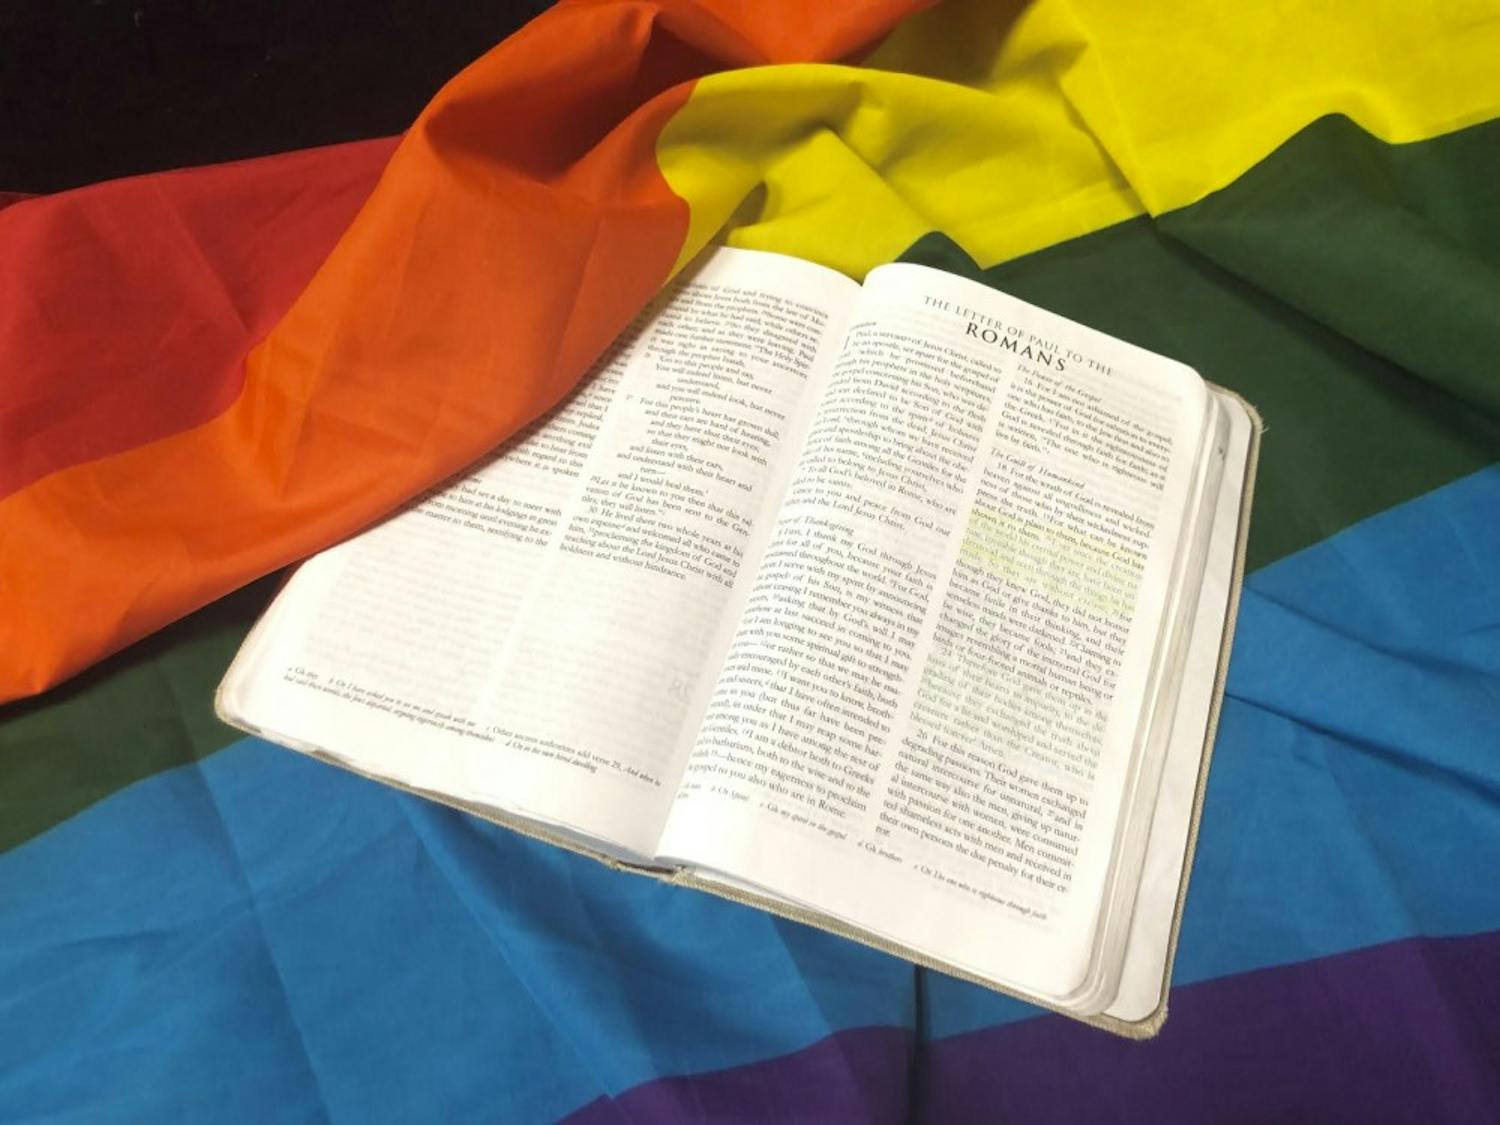 Binkley Baptist Church is hosting a new Bible study series about understanding Bible quotes traditionally used to denigrate the queer community in a new, positive light. Photo by Austin Maynor.